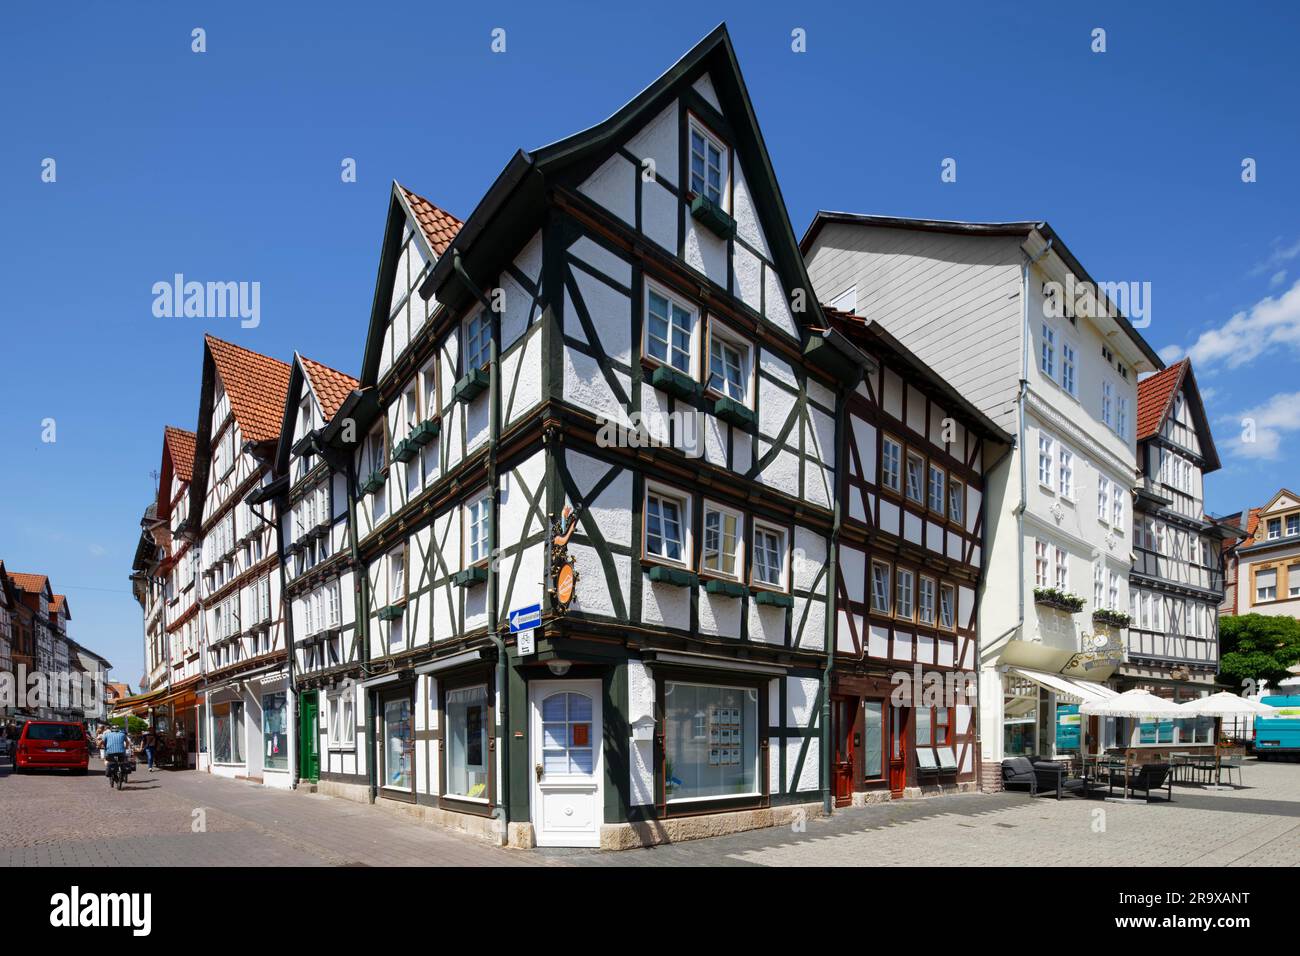 Street, Street with half-timbered house, Half-timbered houses, Marktstr. 33, Old town, District town of Eschwege, Werra-Meissner District, North Stock Photo